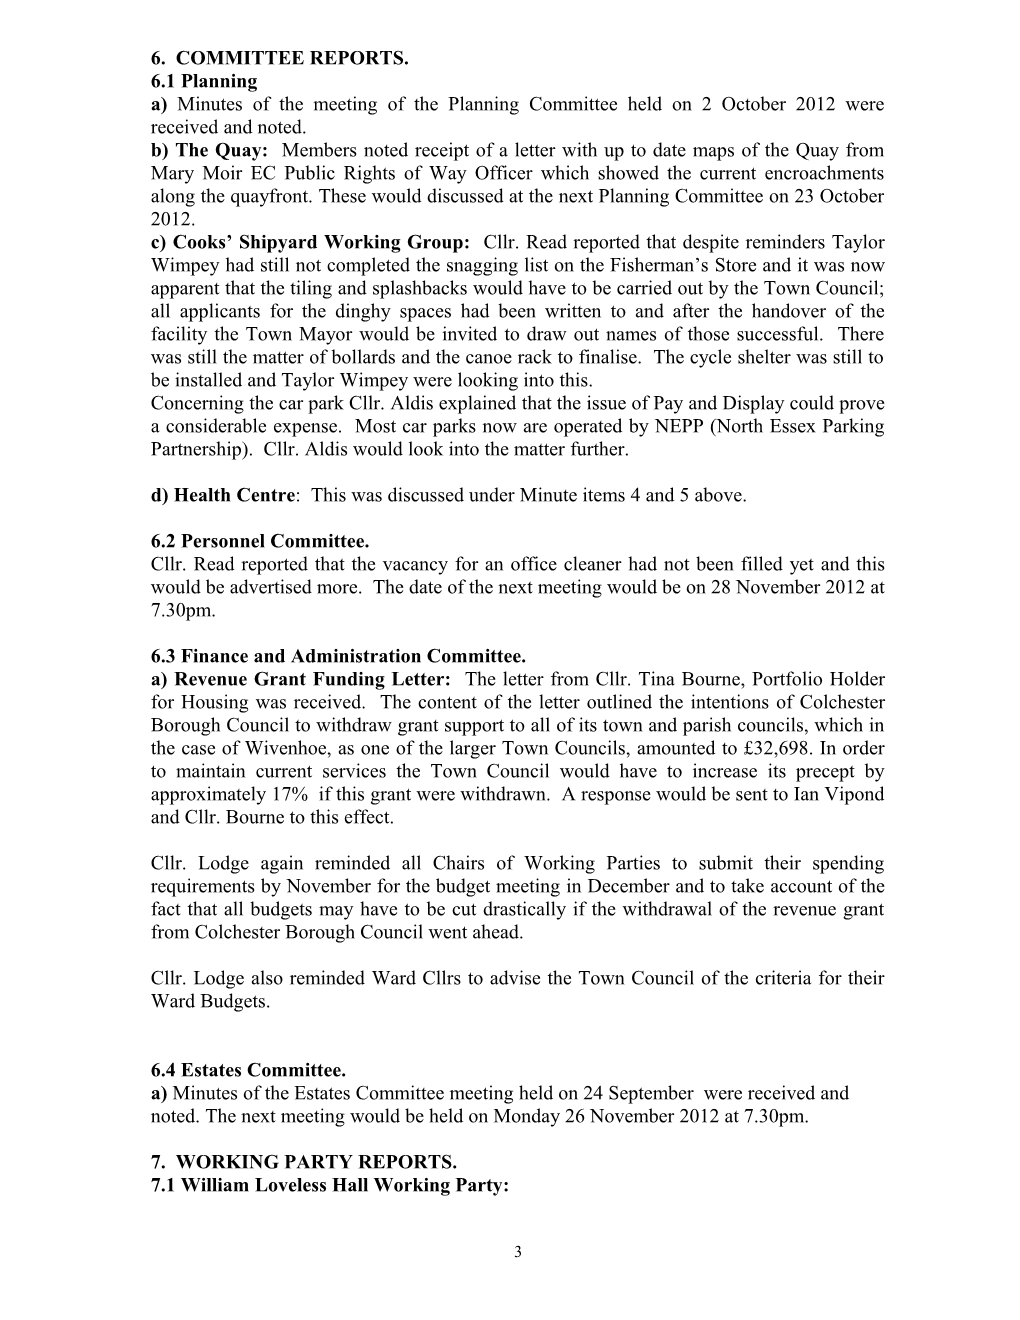 MINUTES of the Meeting of Wivenhoe Town Council Held in the Council Chamber on Monday 15